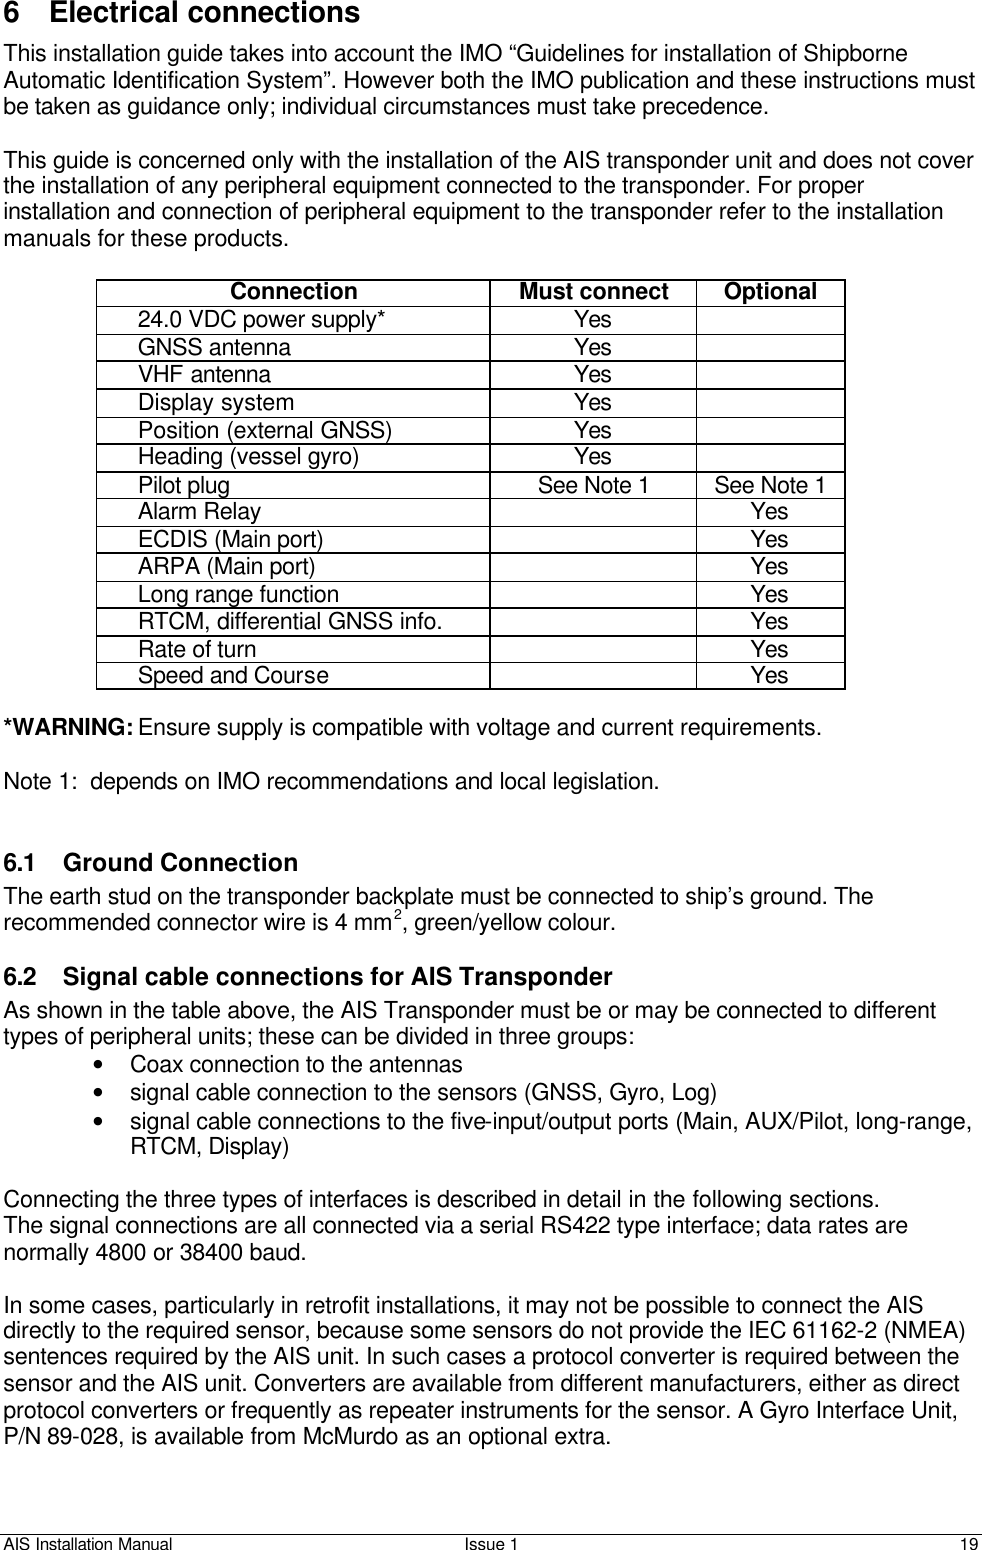 AIS Installation Manual Issue 1 19     6 Electrical connections  This installation guide takes into account the IMO “Guidelines for installation of Shipborne Automatic Identification System”. However both the IMO publication and these instructions must be taken as guidance only; individual circumstances must take precedence.  This guide is concerned only with the installation of the AIS transponder unit and does not cover the installation of any peripheral equipment connected to the transponder. For proper installation and connection of peripheral equipment to the transponder refer to the installation manuals for these products.  Connection Must connect Optional  24.0 VDC power supply* Yes    GNSS antenna Yes    VHF antenna Yes    Display system  Yes    Position (external GNSS) Yes    Heading (vessel gyro) Yes    Pilot plug See Note 1 See Note 1  Alarm Relay    Yes  ECDIS (Main port)    Yes  ARPA (Main port)    Yes  Long range function    Yes  RTCM, differential GNSS info.    Yes  Rate of turn    Yes  Speed and Course    Yes  *WARNING: Ensure supply is compatible with voltage and current requirements.  Note 1:  depends on IMO recommendations and local legislation.   6.1 Ground Connection The earth stud on the transponder backplate must be connected to ship’s ground. The recommended connector wire is 4 mm2, green/yellow colour.  6.2 Signal cable connections for AIS Transponder As shown in the table above, the AIS Transponder must be or may be connected to different types of peripheral units; these can be divided in three groups:  • Coax connection to the antennas • signal cable connection to the sensors (GNSS, Gyro, Log)  • signal cable connections to the five-input/output ports (Main, AUX/Pilot, long-range, RTCM, Display)  Connecting the three types of interfaces is described in detail in the following sections. The signal connections are all connected via a serial RS422 type interface; data rates are normally 4800 or 38400 baud.  In some cases, particularly in retrofit installations, it may not be possible to connect the AIS directly to the required sensor, because some sensors do not provide the IEC 61162-2 (NMEA) sentences required by the AIS unit. In such cases a protocol converter is required between the sensor and the AIS unit. Converters are available from different manufacturers, either as direct protocol converters or frequently as repeater instruments for the sensor. A Gyro Interface Unit, P/N 89-028, is available from McMurdo as an optional extra.  